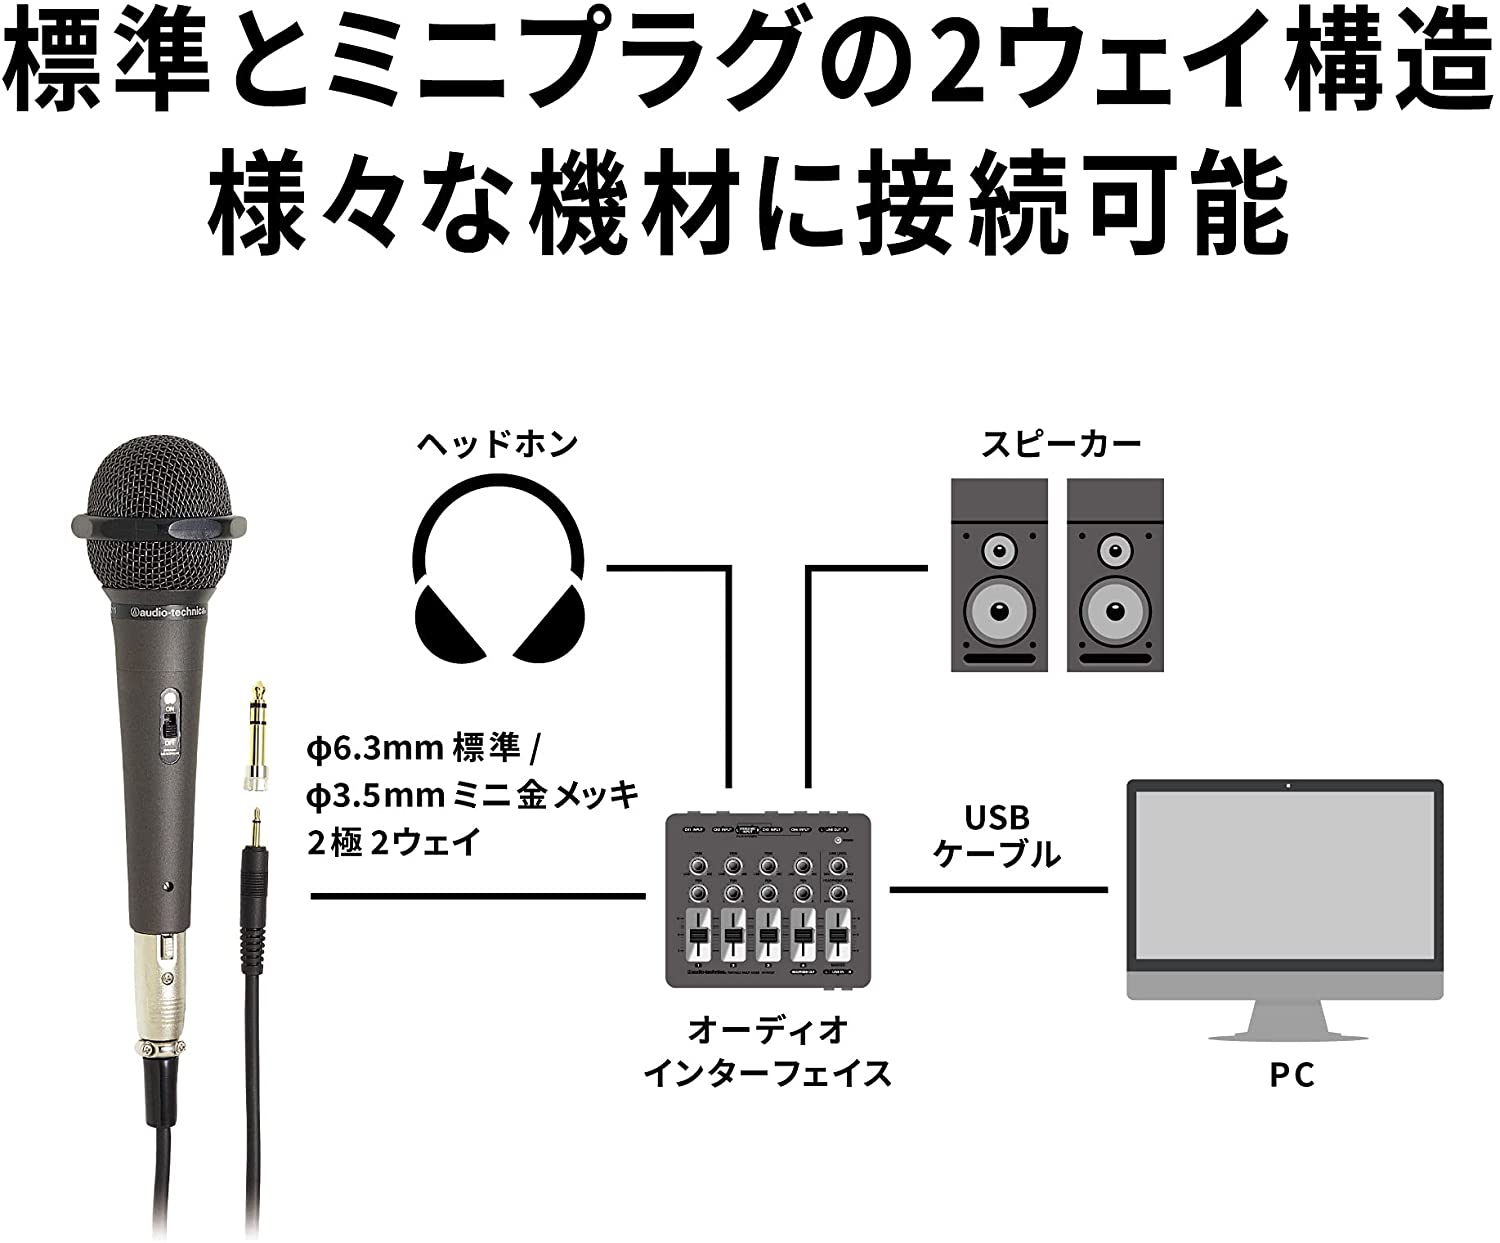 Microphone Audio Technica AT-X11